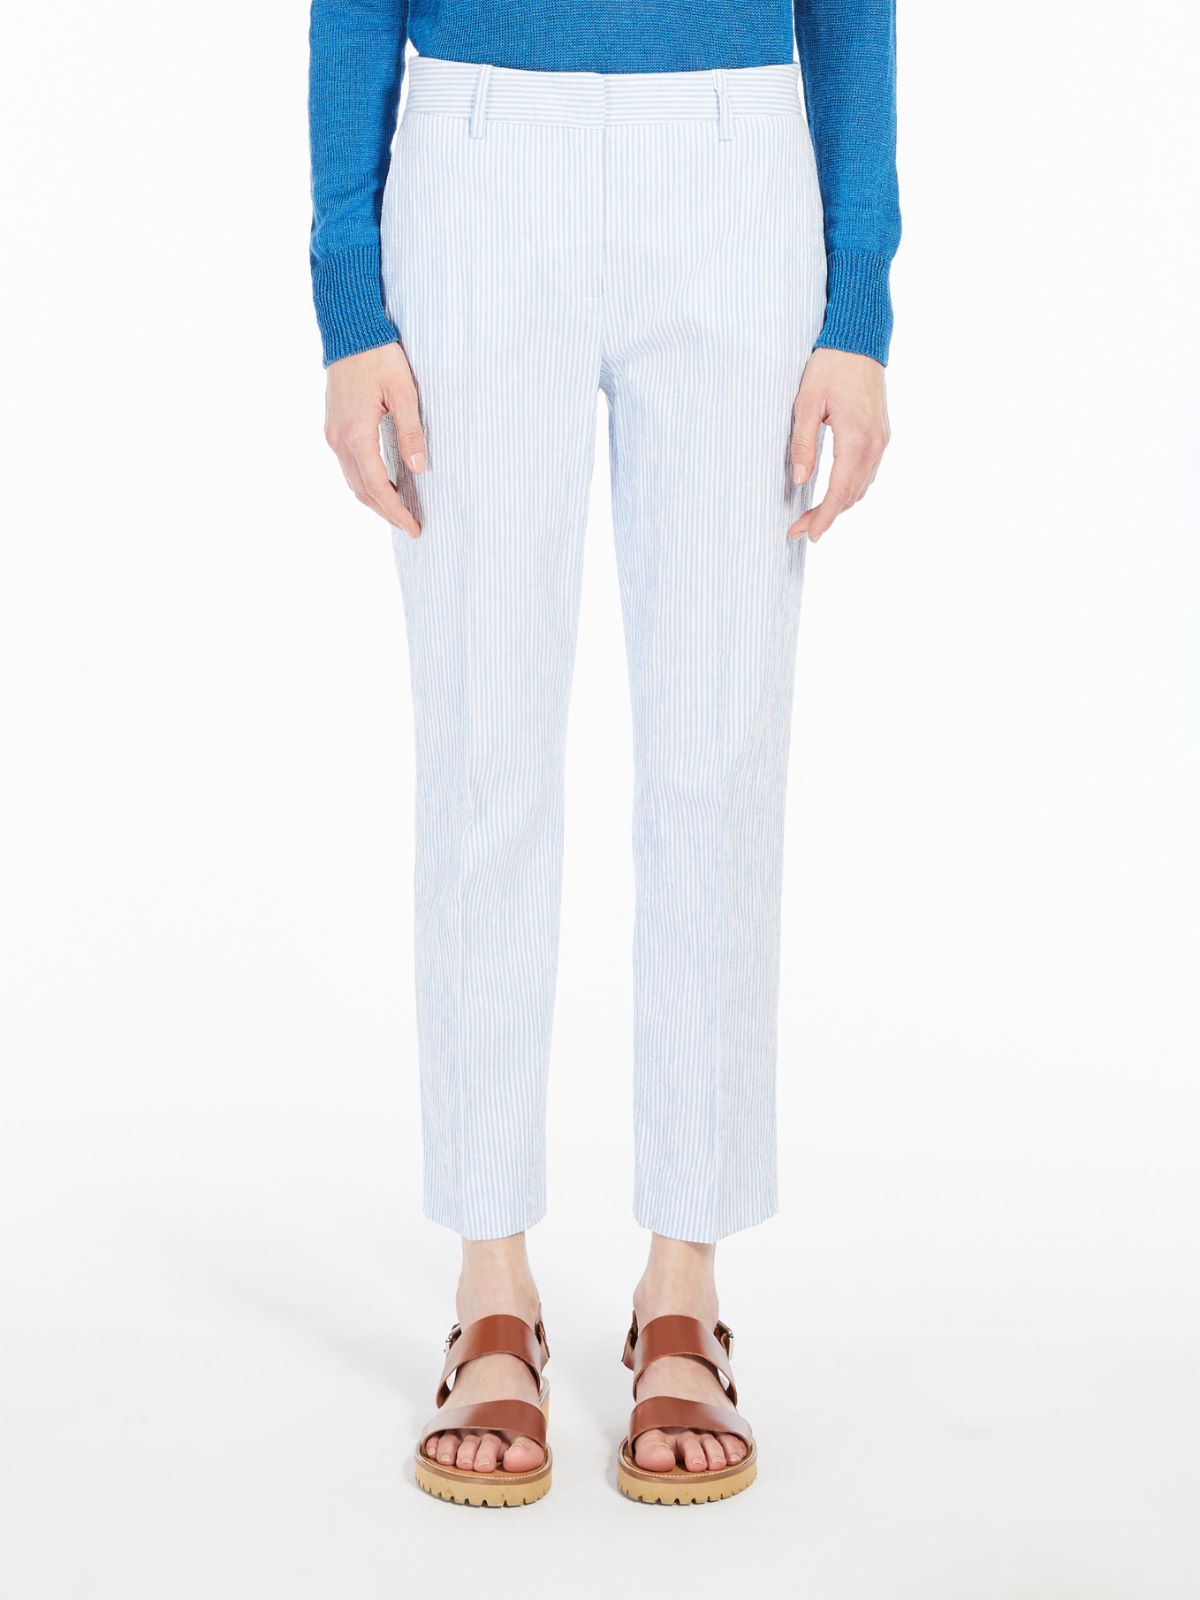 Cotton and linen trousers - LIGHT BLUE - Weekend Max Mara - 2